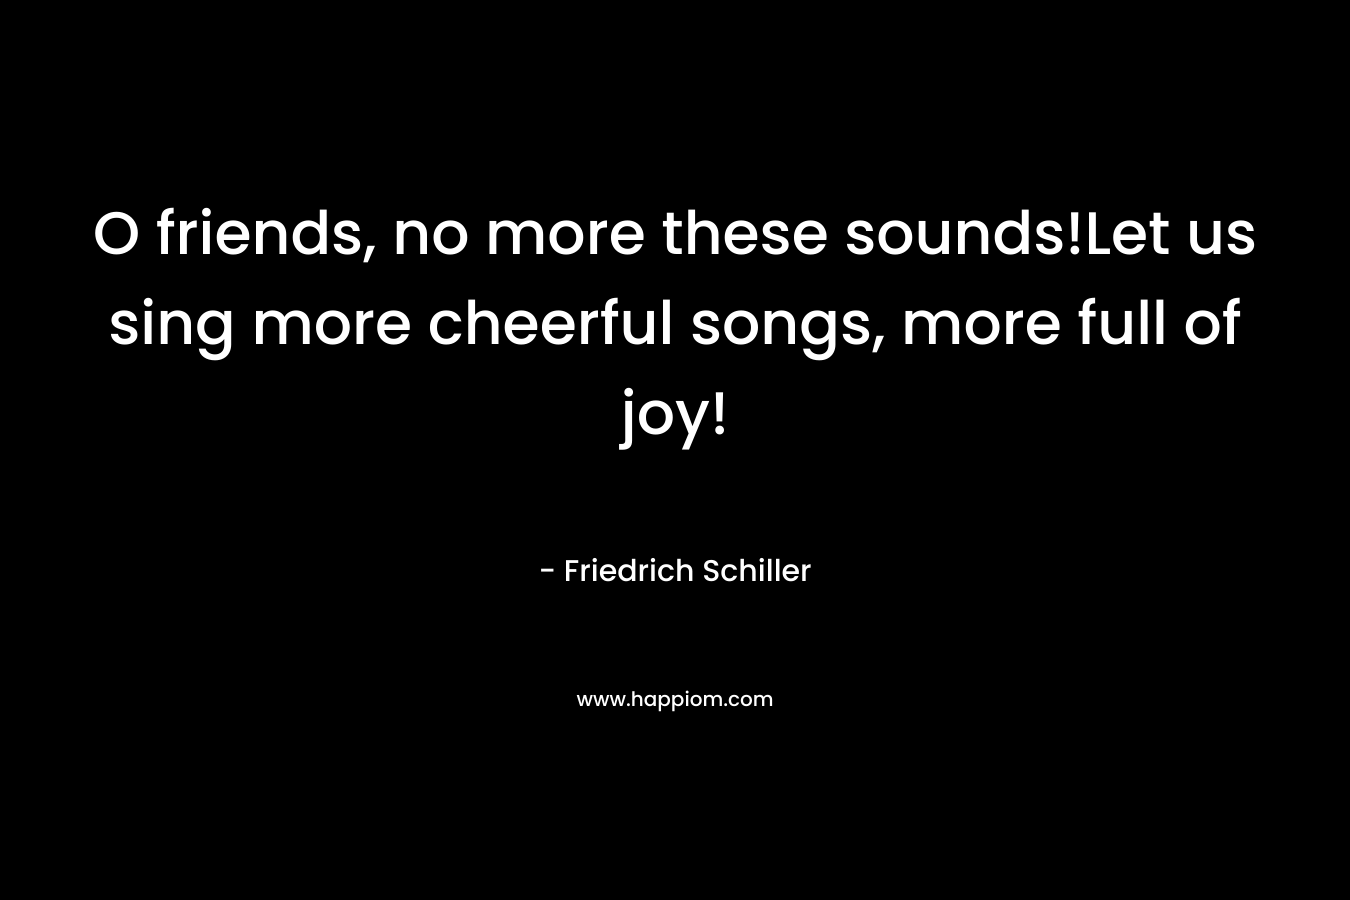 O friends, no more these sounds!Let us sing more cheerful songs, more full of joy! – Friedrich Schiller